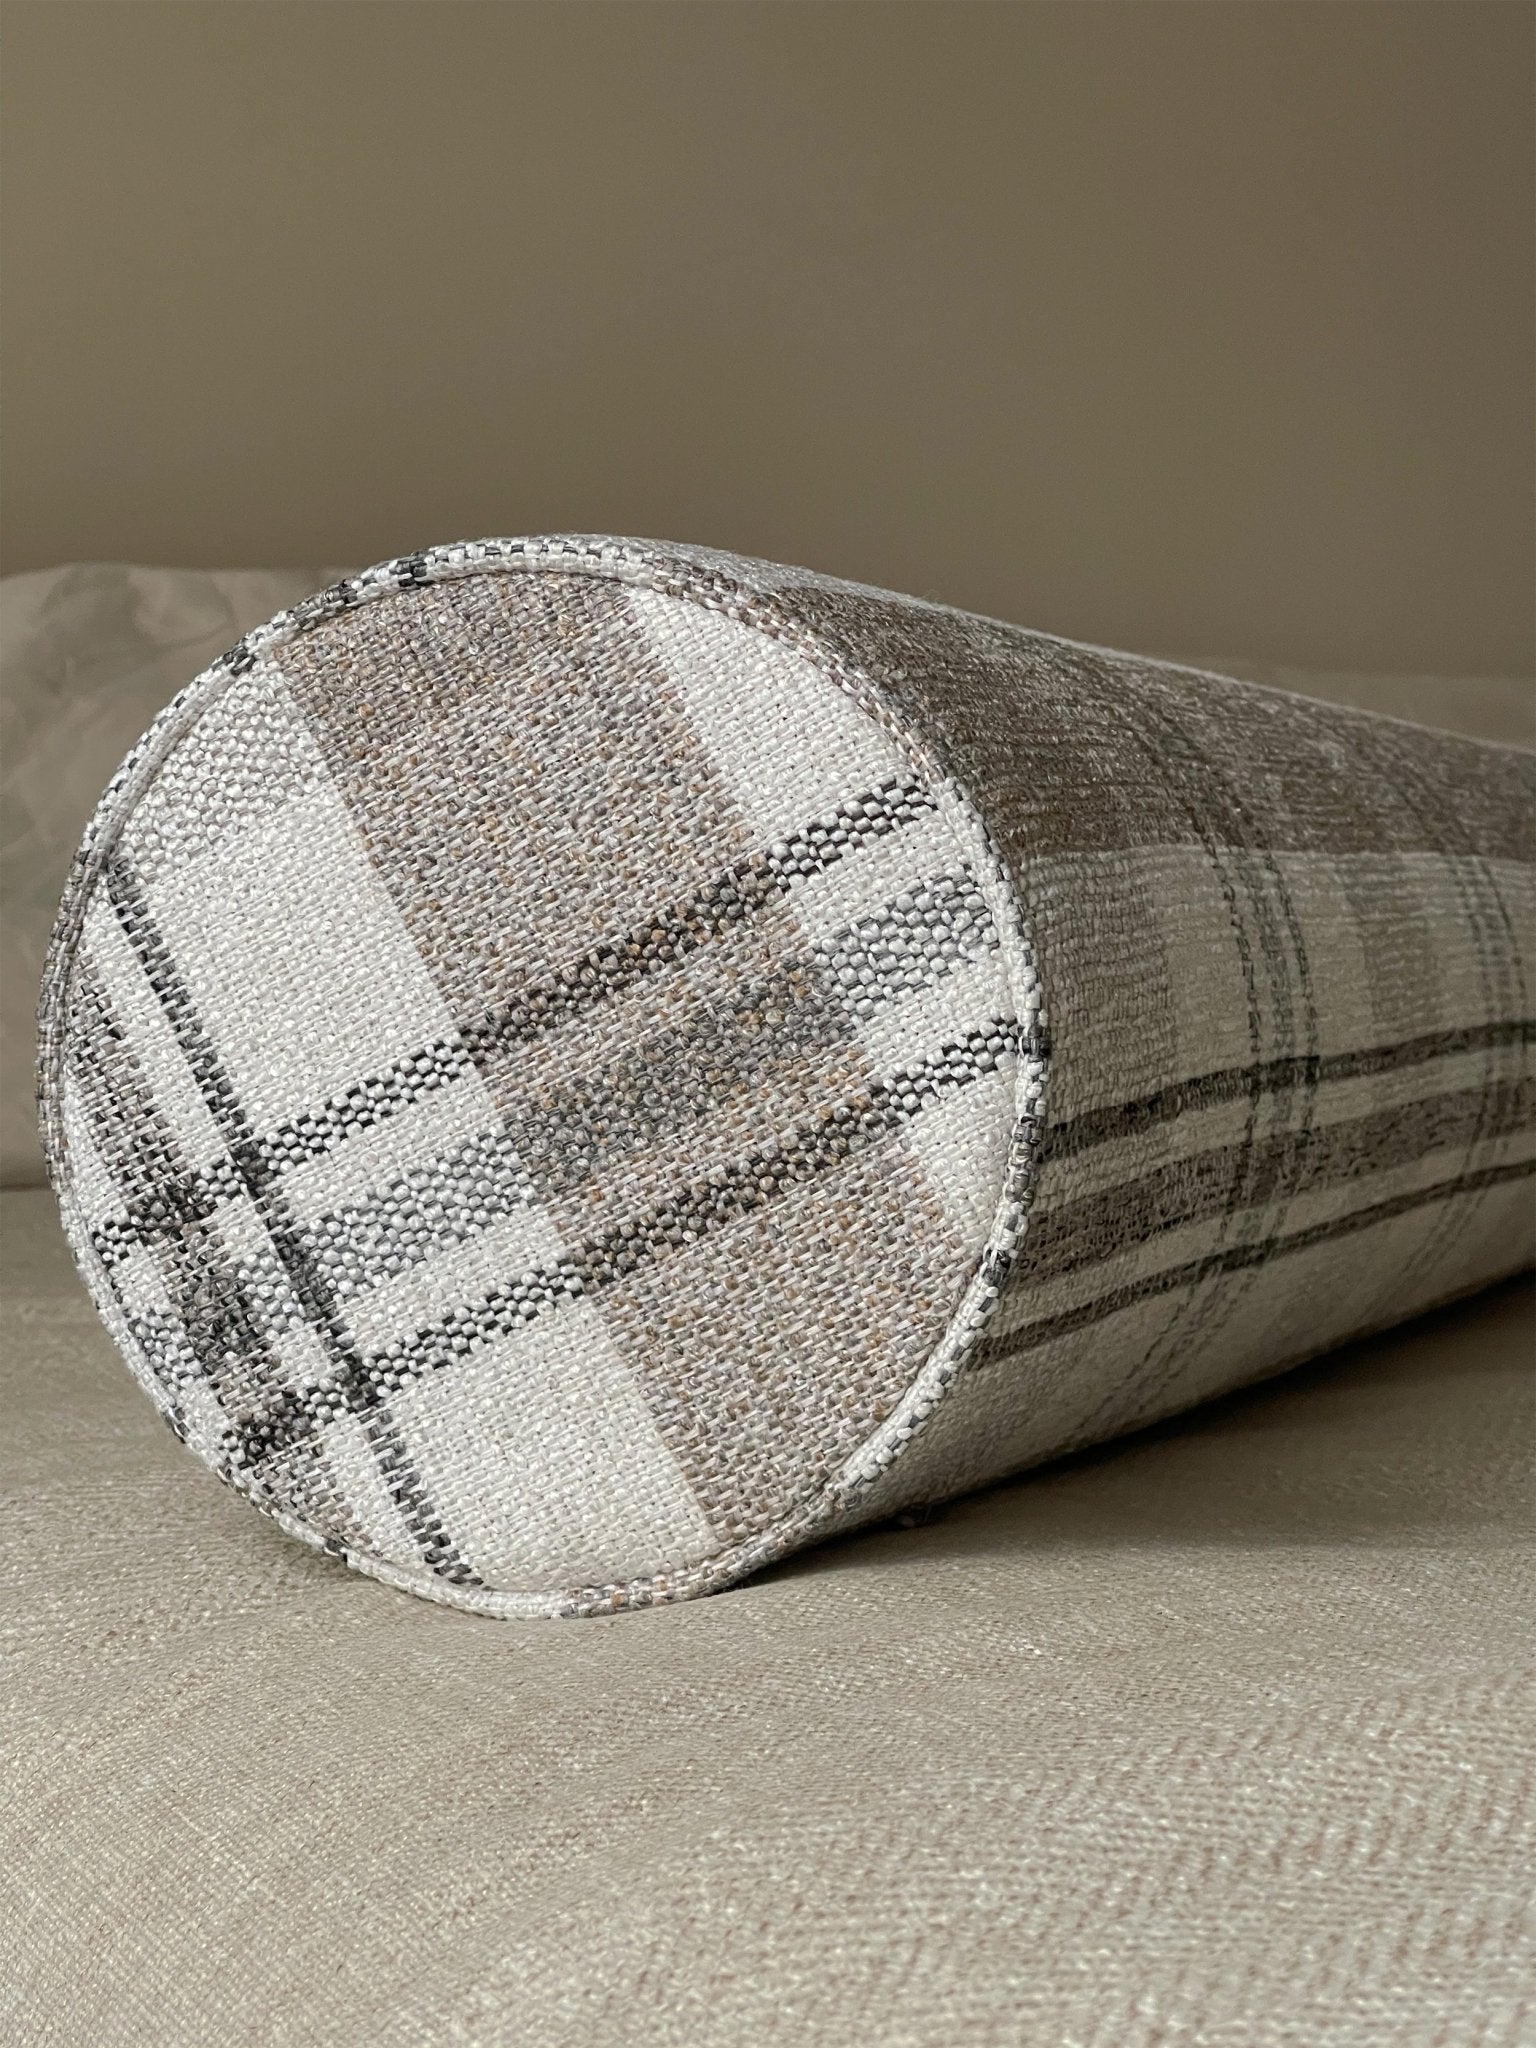 A neutral plaid bolster pillow with firm foam insert adds coziness to the space